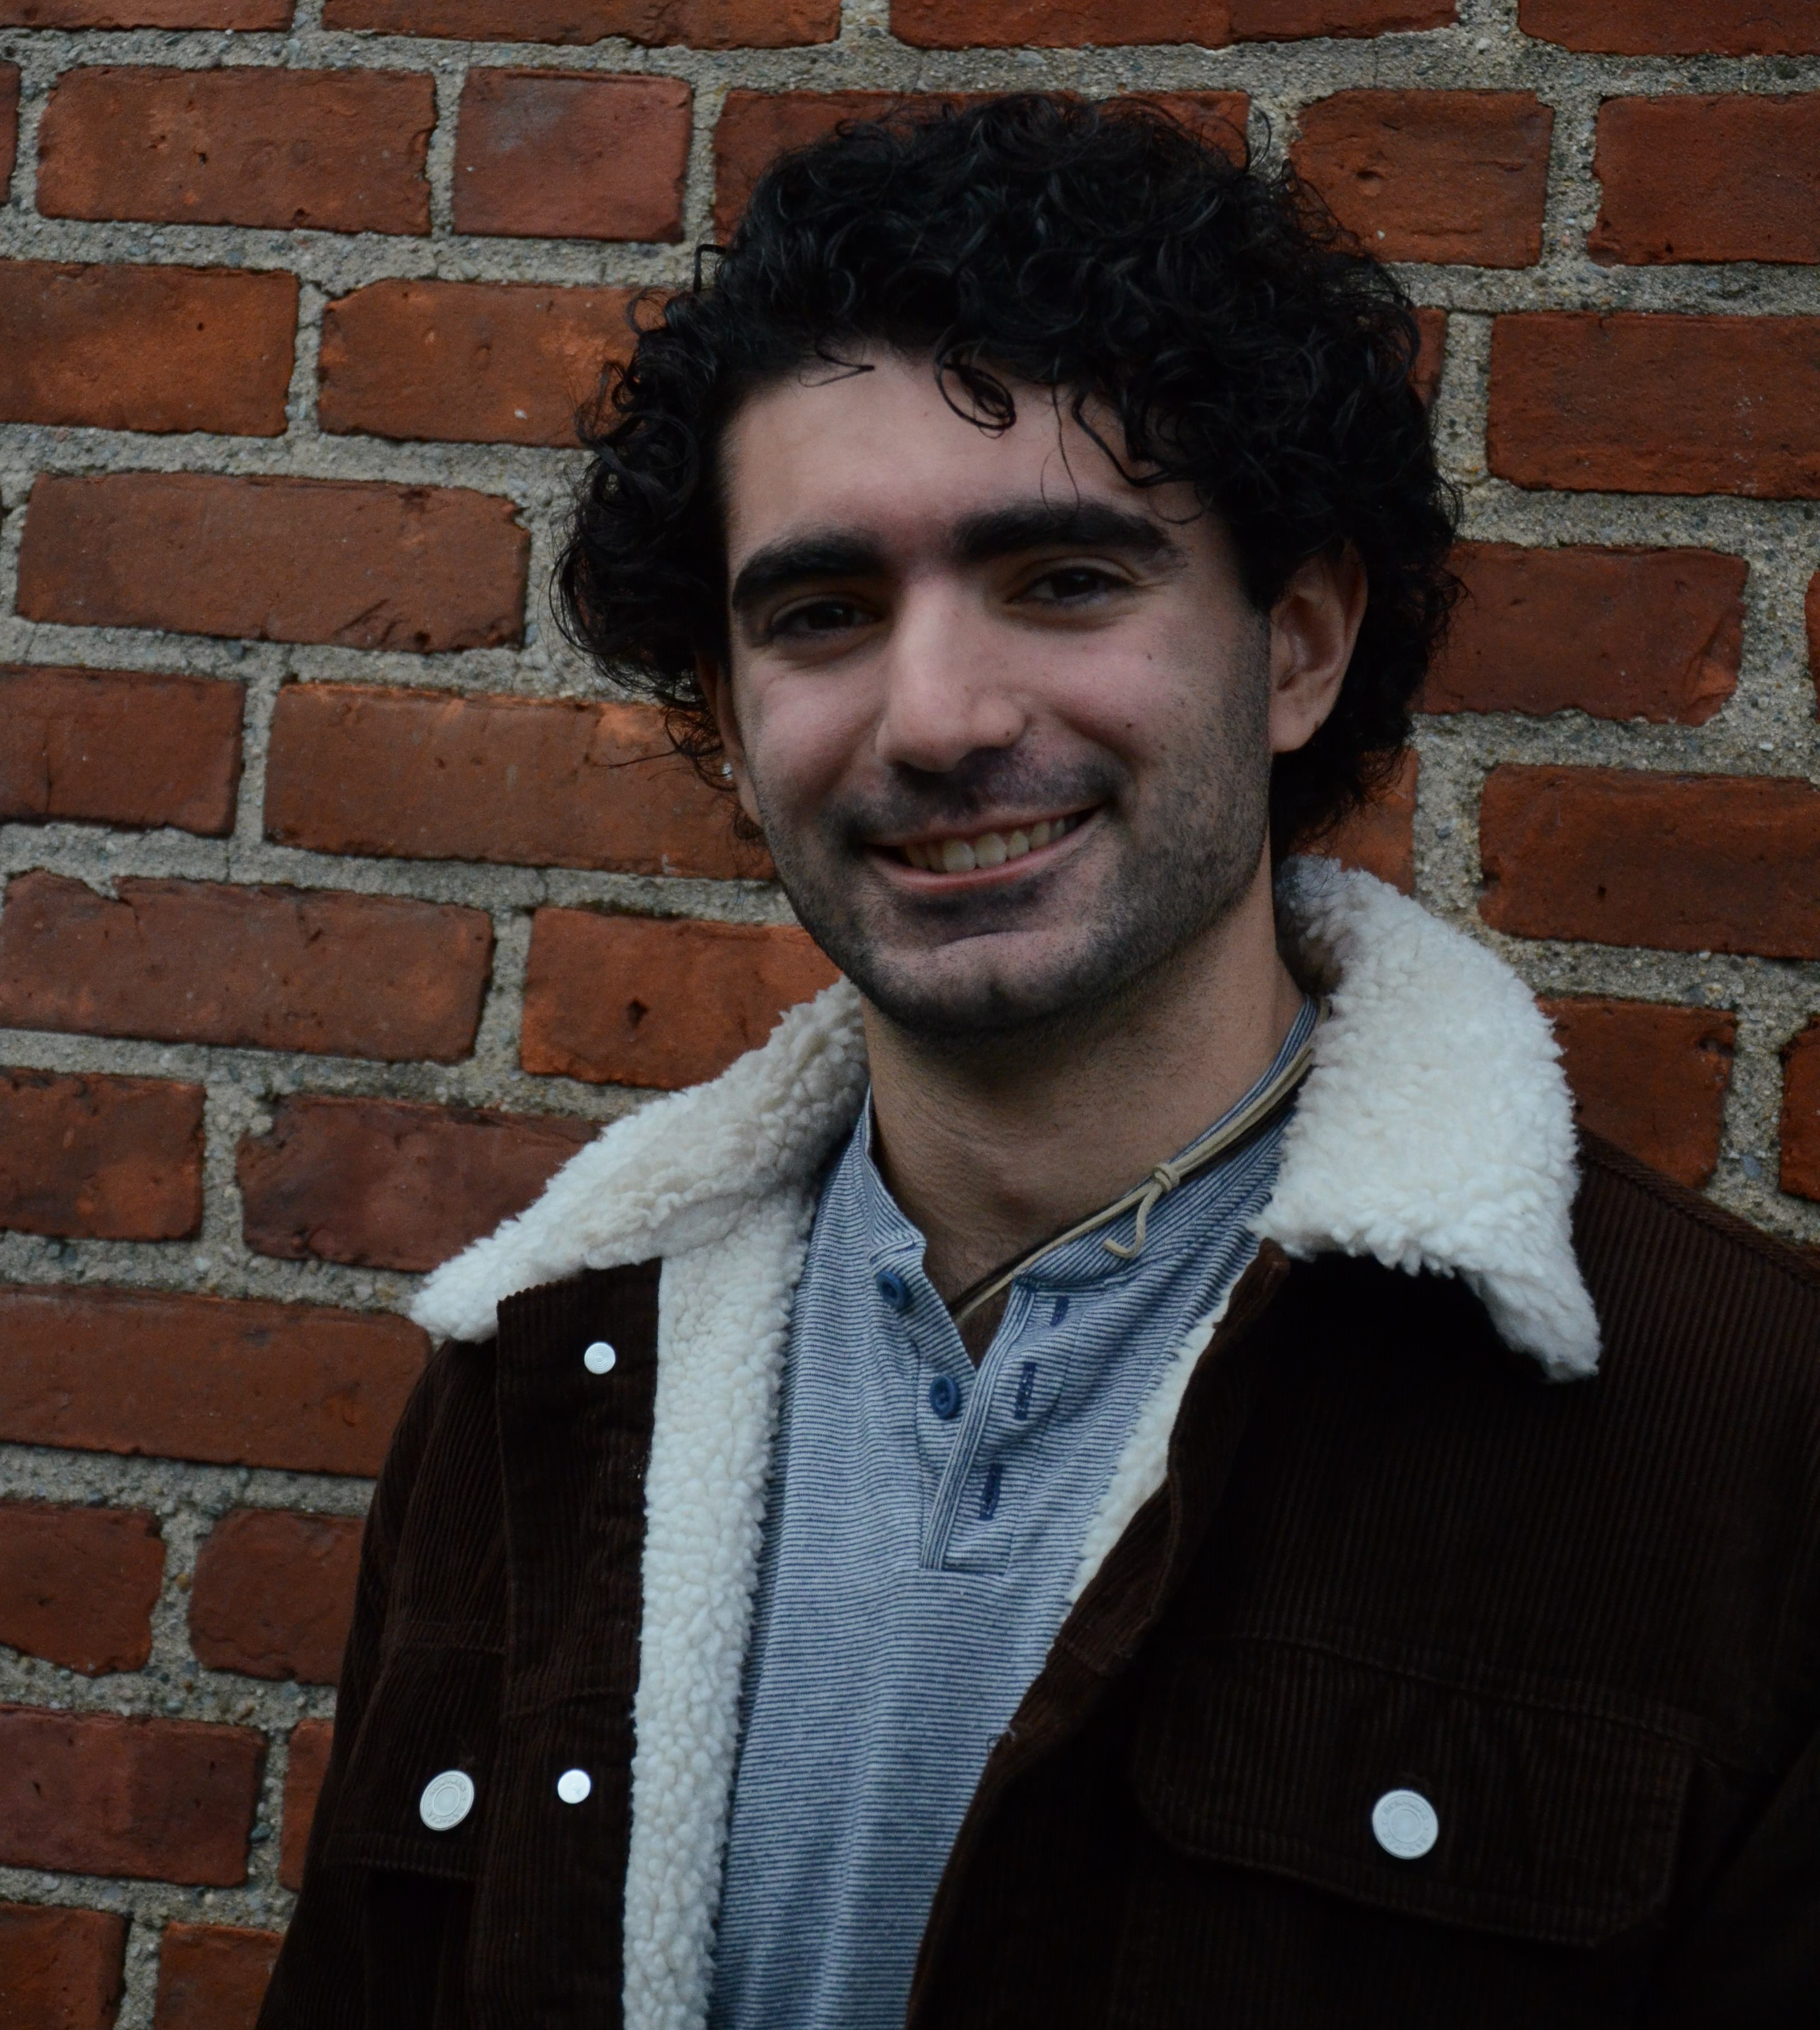 A professional photo of Matthew Blanco. He is smiling at the camera in front of a brick wall.